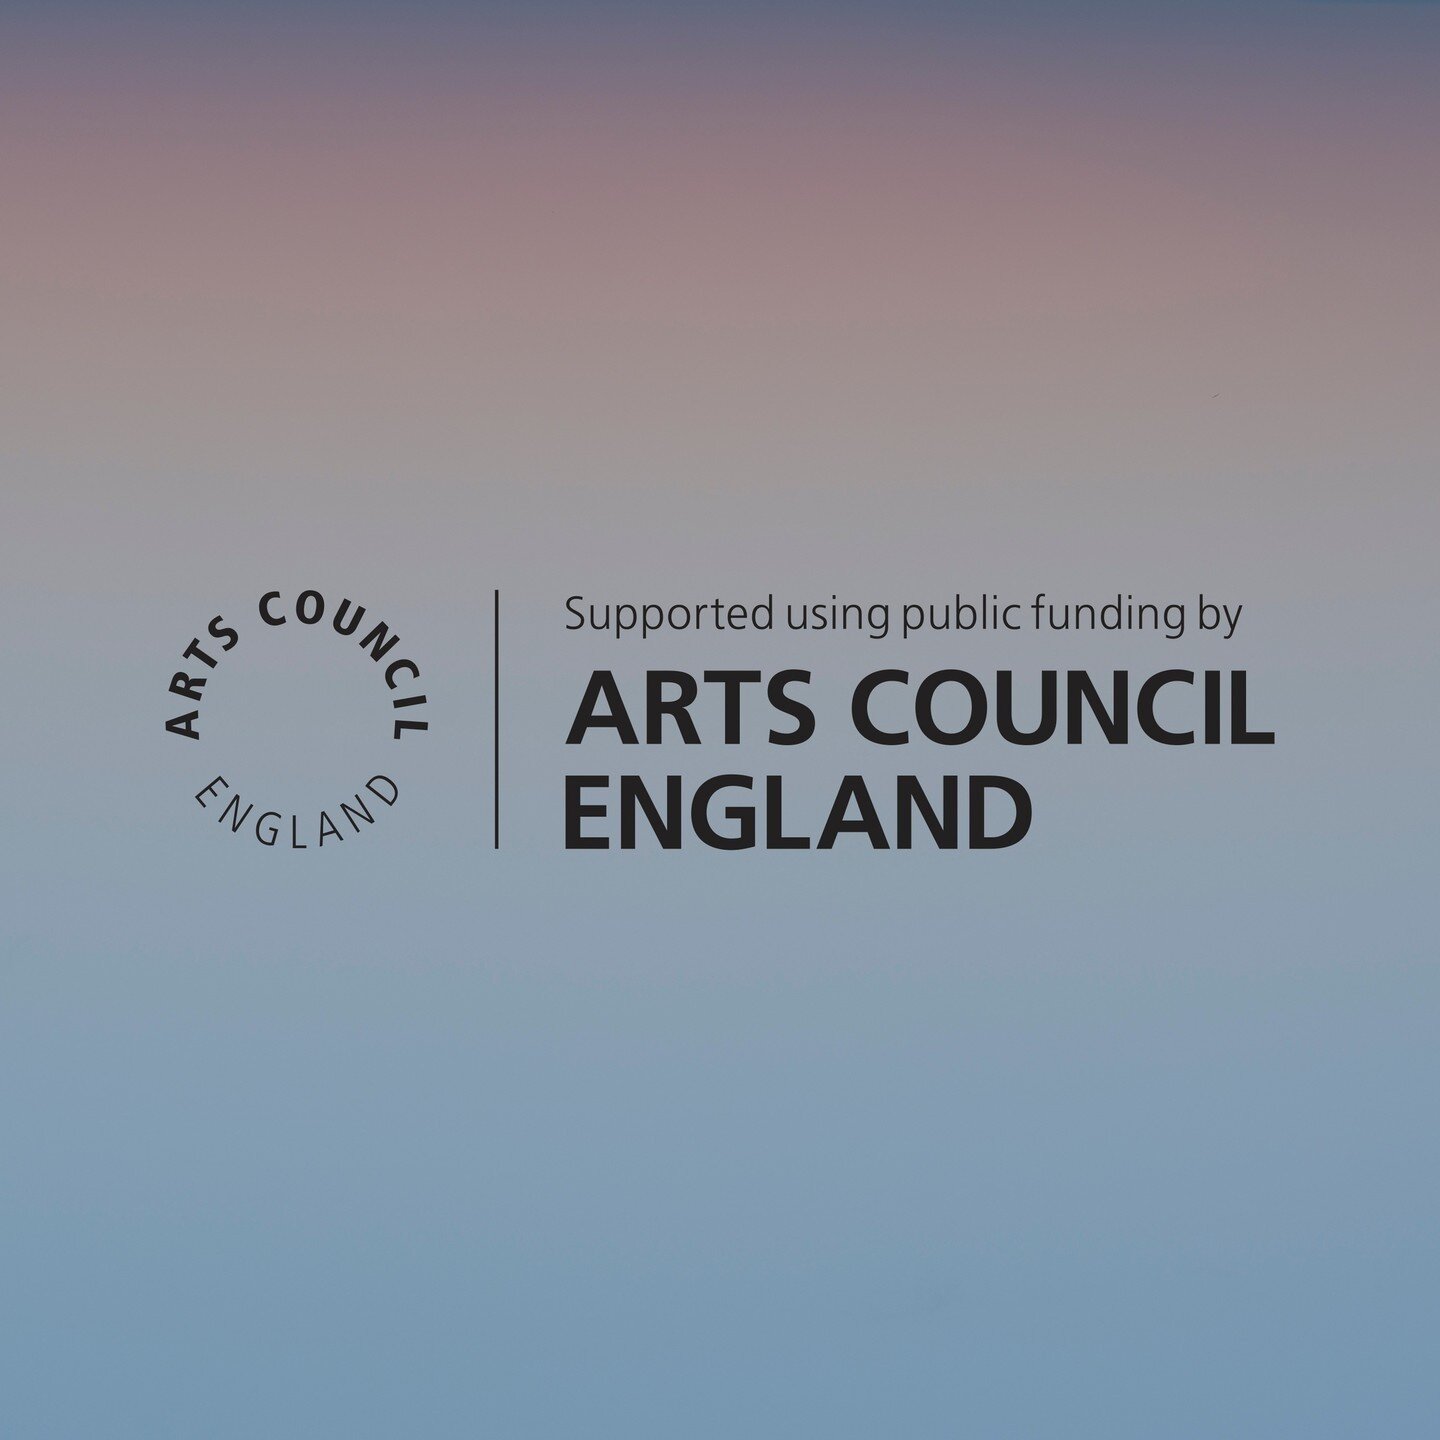 I am delighted to share that I have been awarded a second @aceagrams Arts Council England Developing Your Creative Practice grant. This award will enable me to do several sound and video courses, alongside having mentoring from two curators that I gr